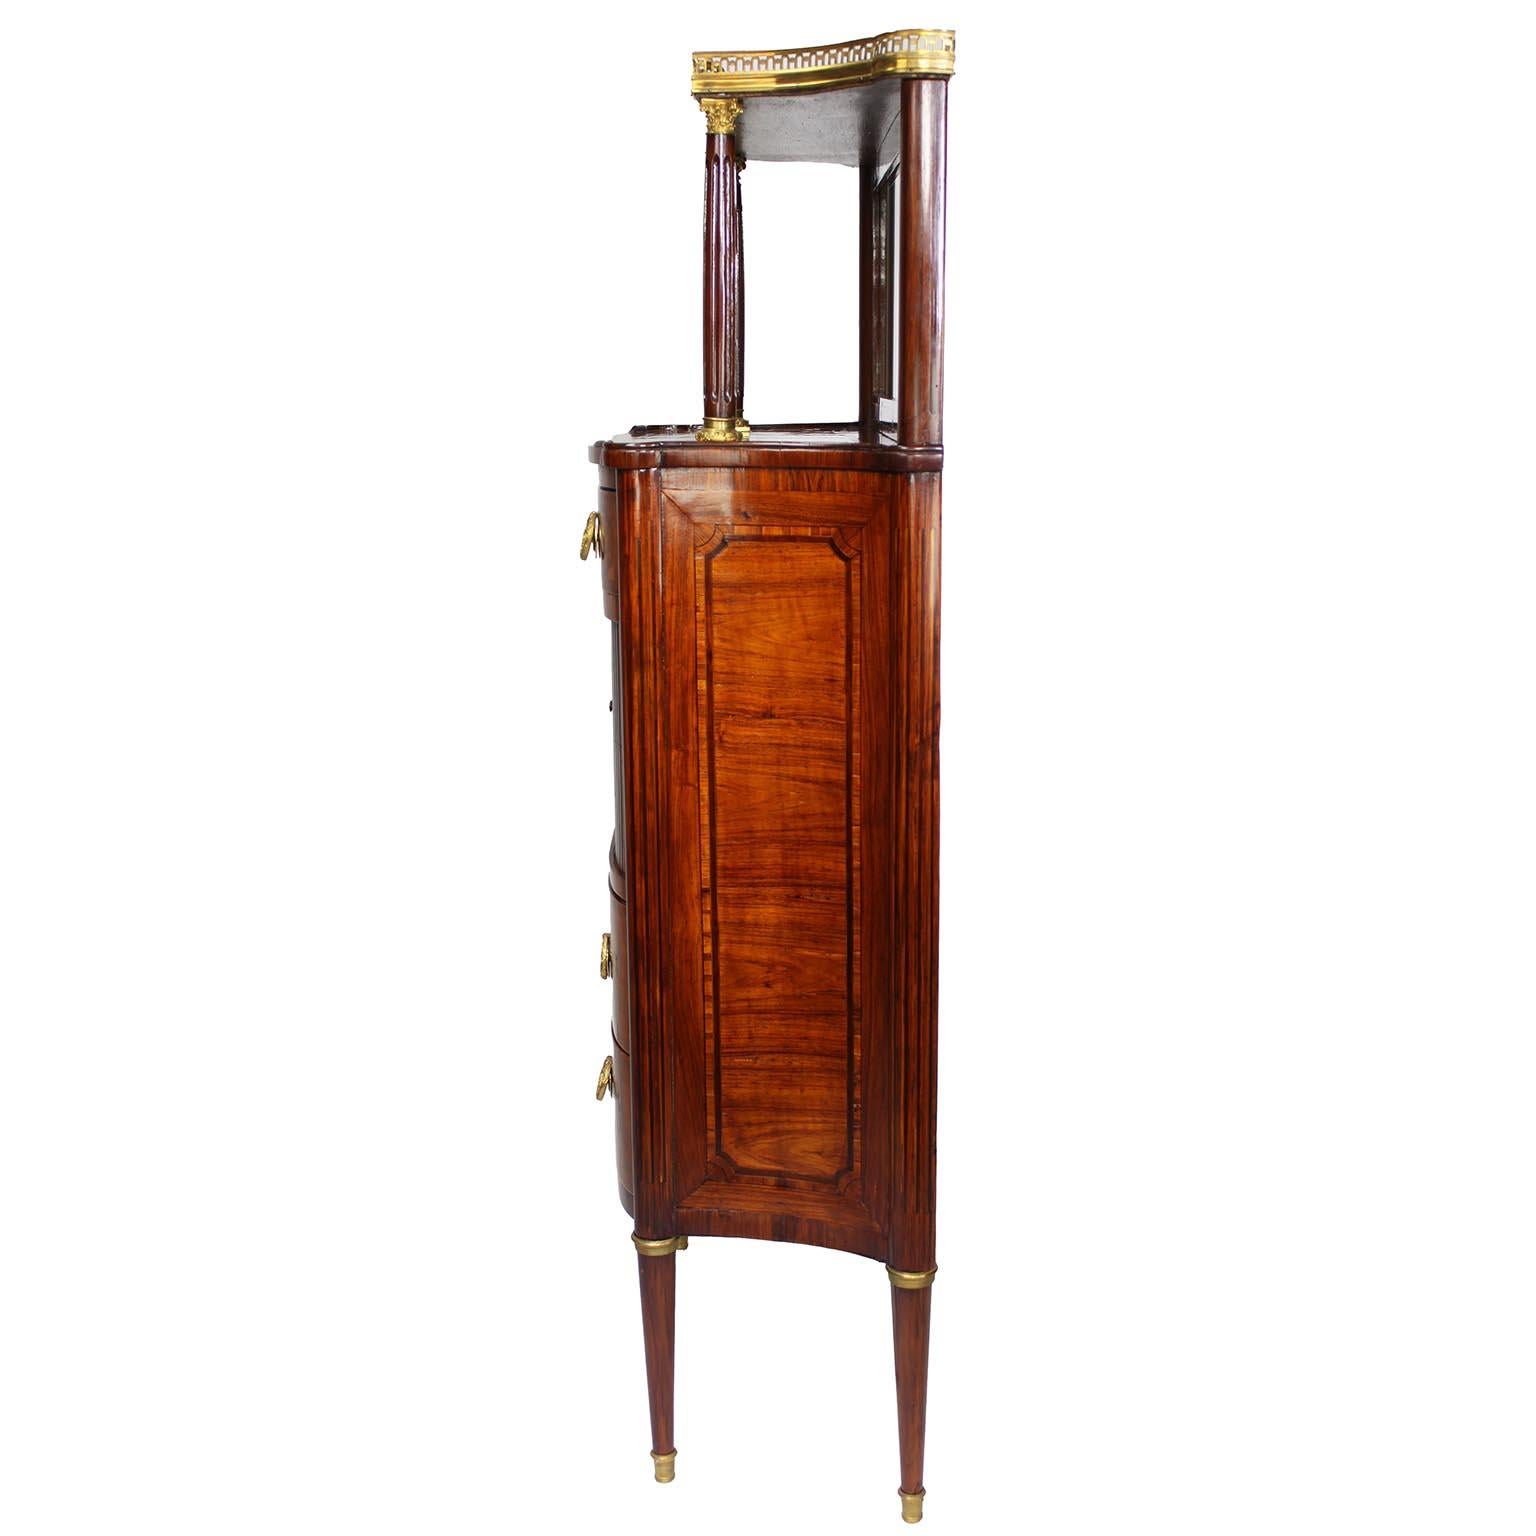 A French 19th Century Louis XVI Style Gilt-Bronze Mounted Meuble d'Appui Cabinet For Sale 7